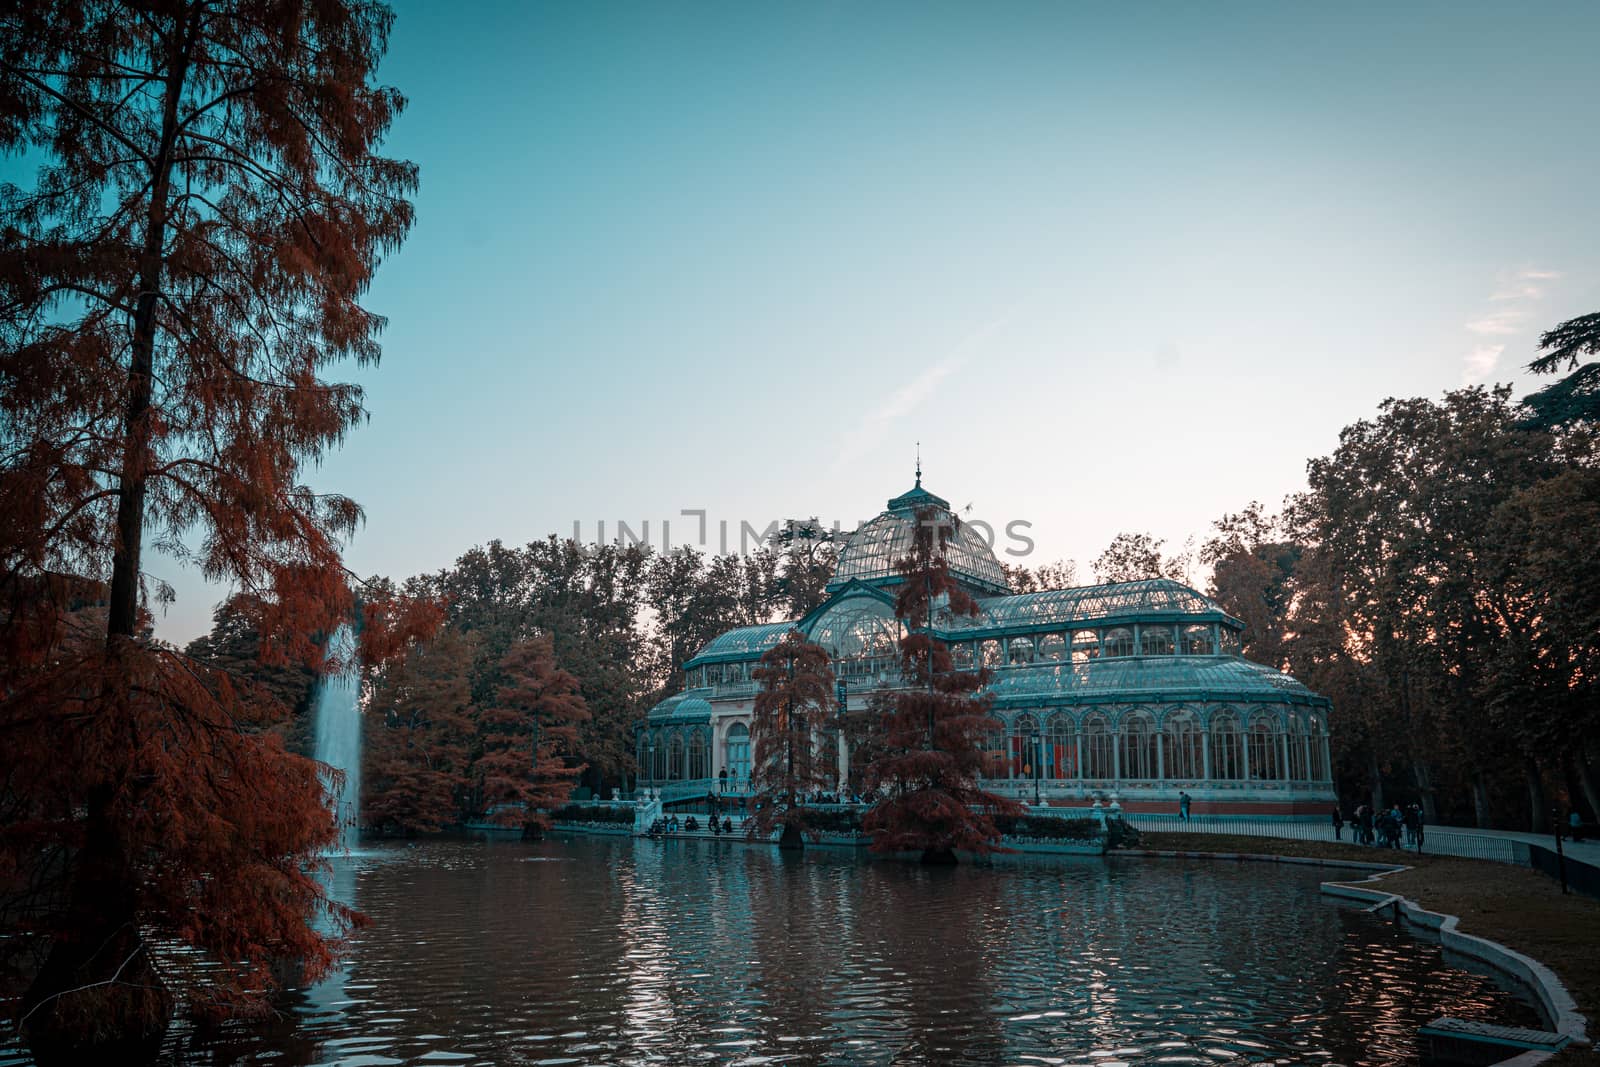 Sunset view of Crystal Palace or Palacio de cristal in Retiro Park in Madrid, Spain. by tanaonte